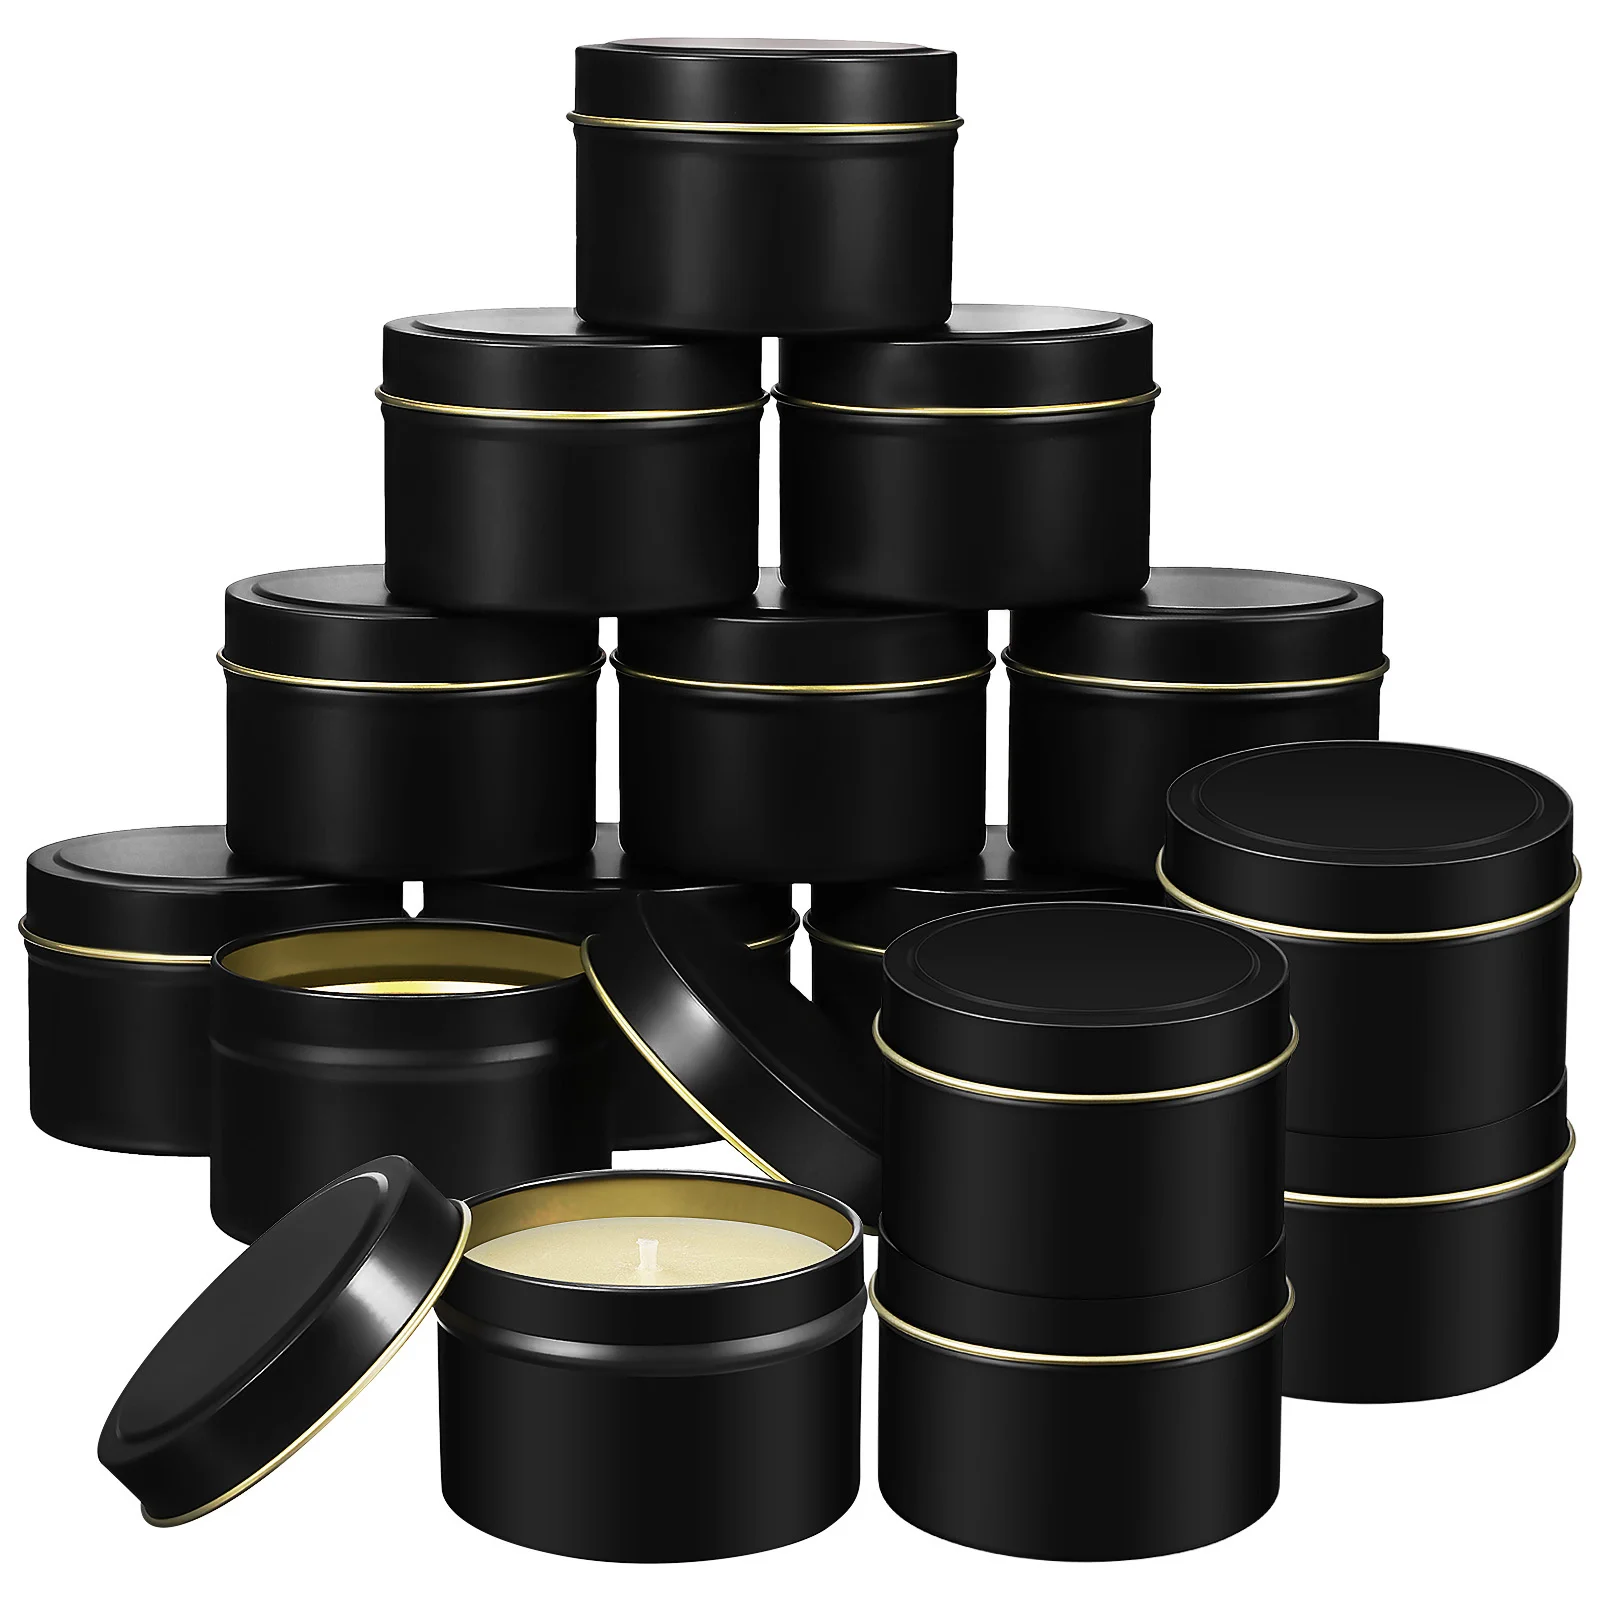 

24 Pcs Jar Tinplate Aromatherapy Empty (black) Pieces Jars for Making Candles Bulk with Cover